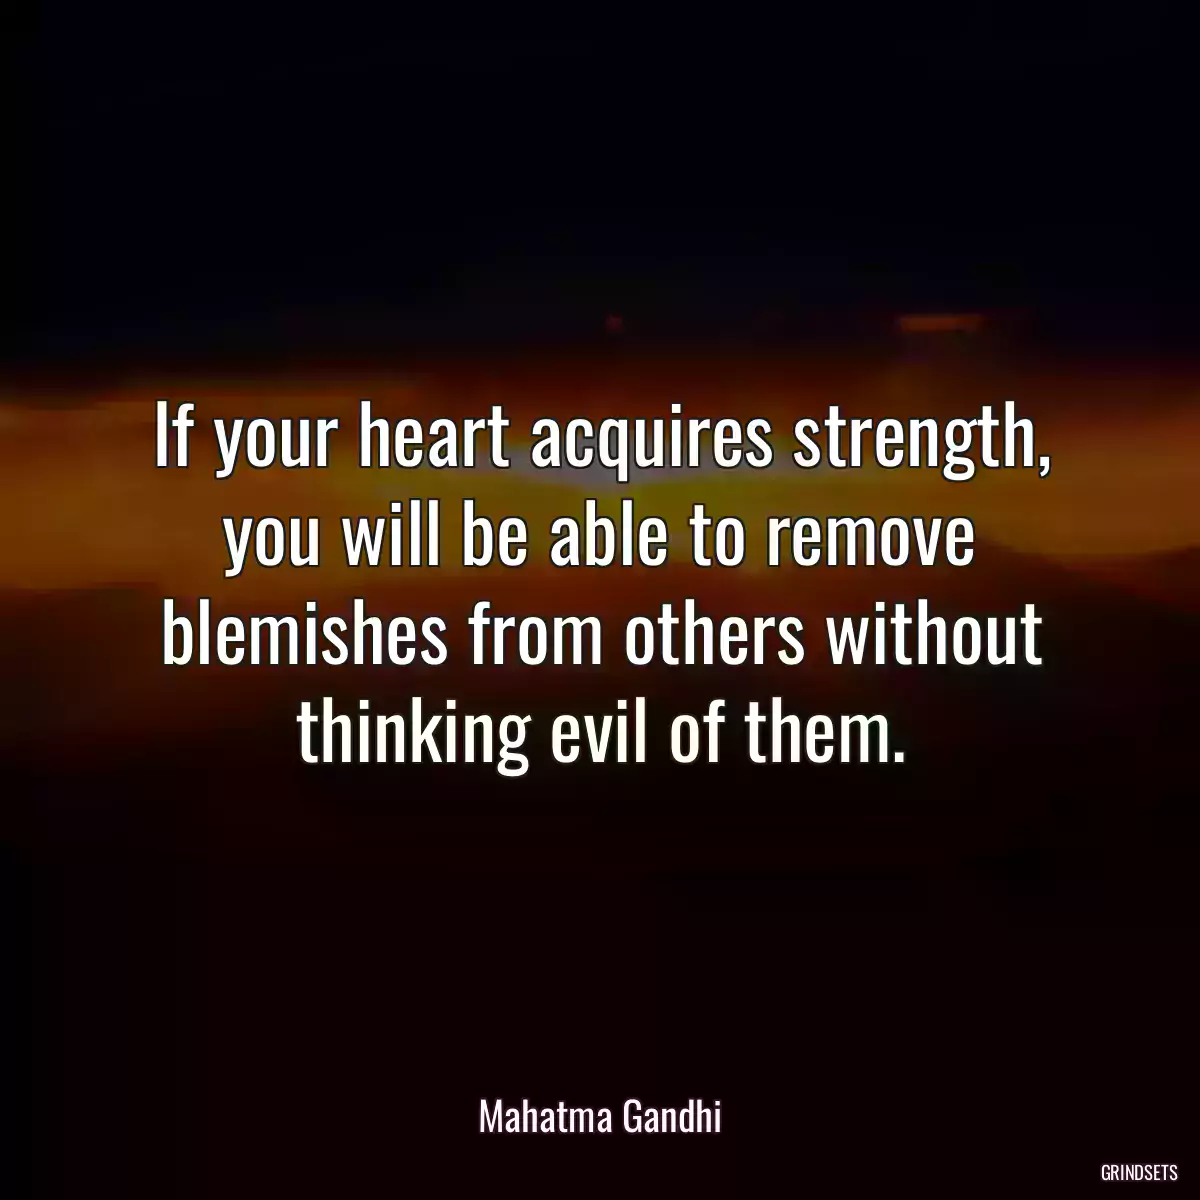 If your heart acquires strength, you will be able to remove blemishes from others without thinking evil of them.